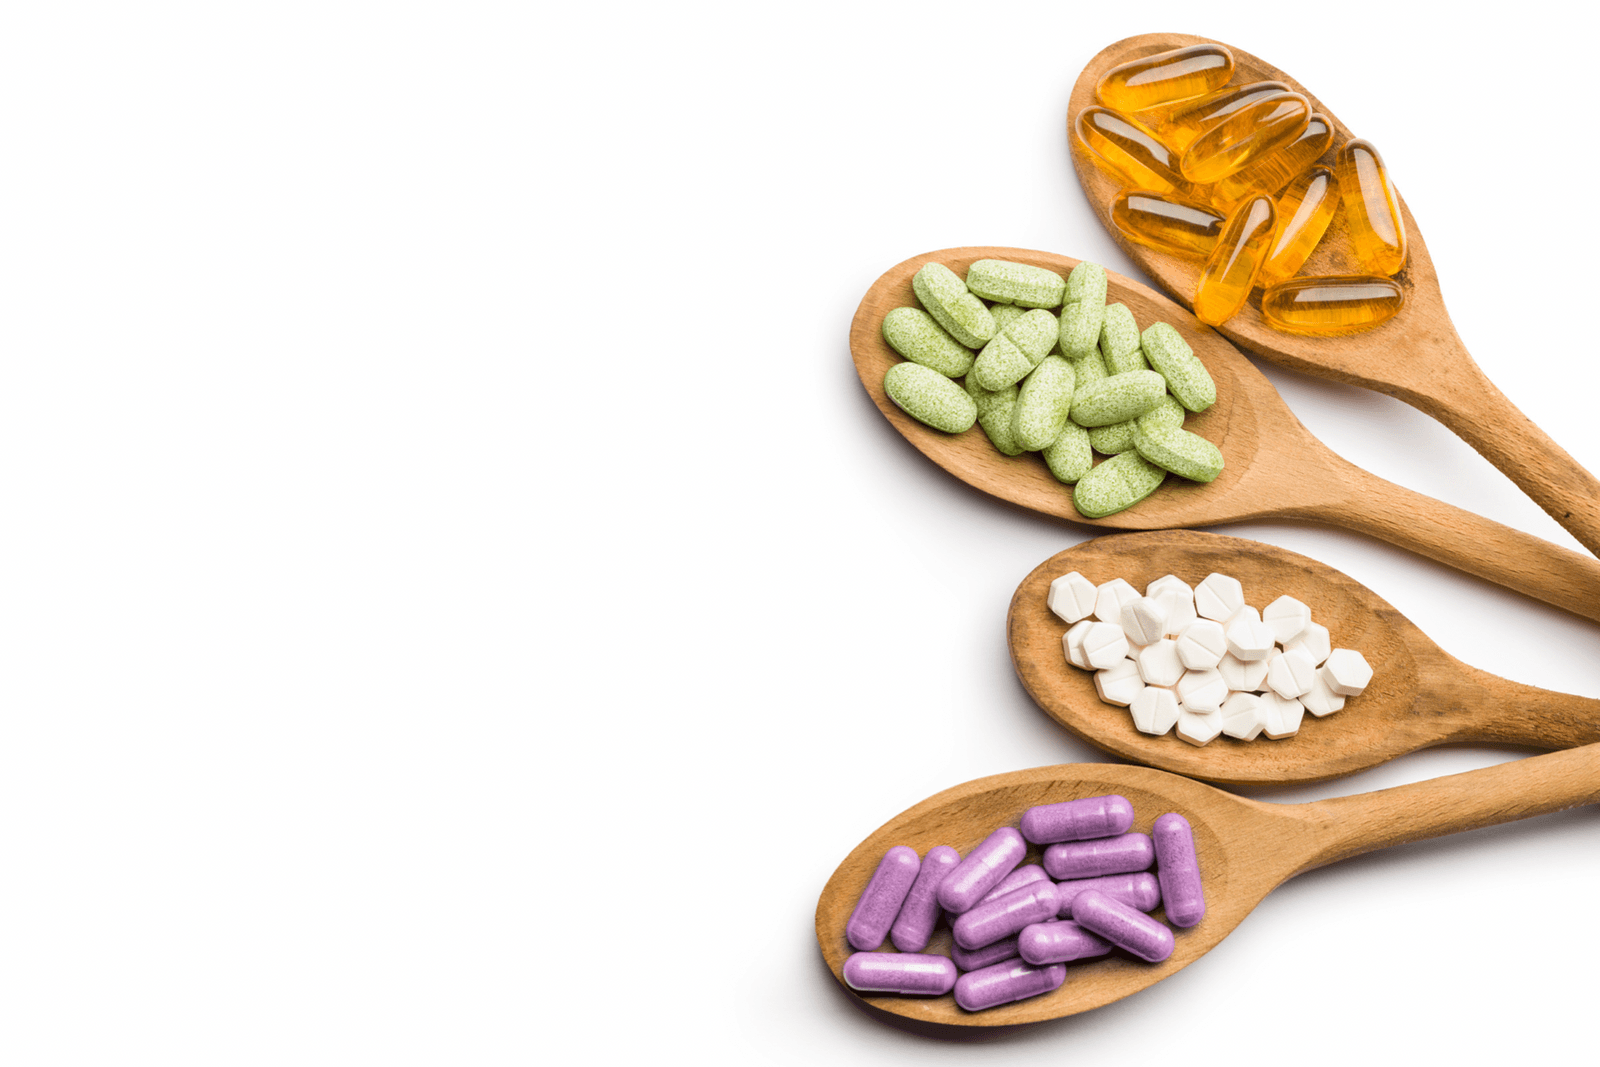 Six Foundational Supplements for Optimizing Health